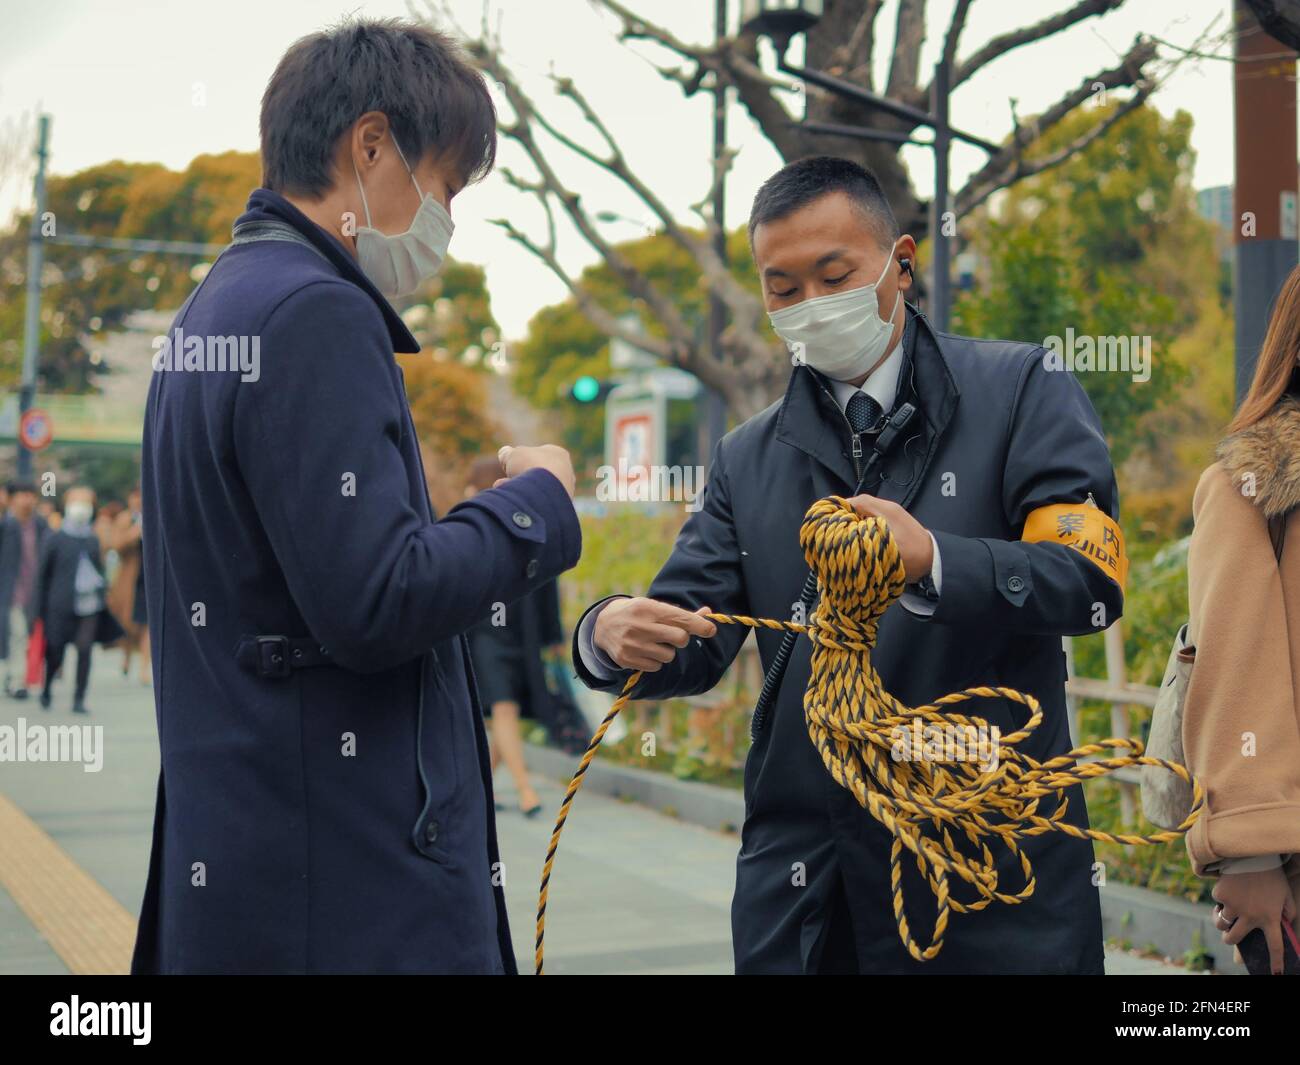 Two Japanese guides arrange a colored rope. Two Asian men with masks organize the route for tourists. Lifestyle and manual skills. Stock Photo